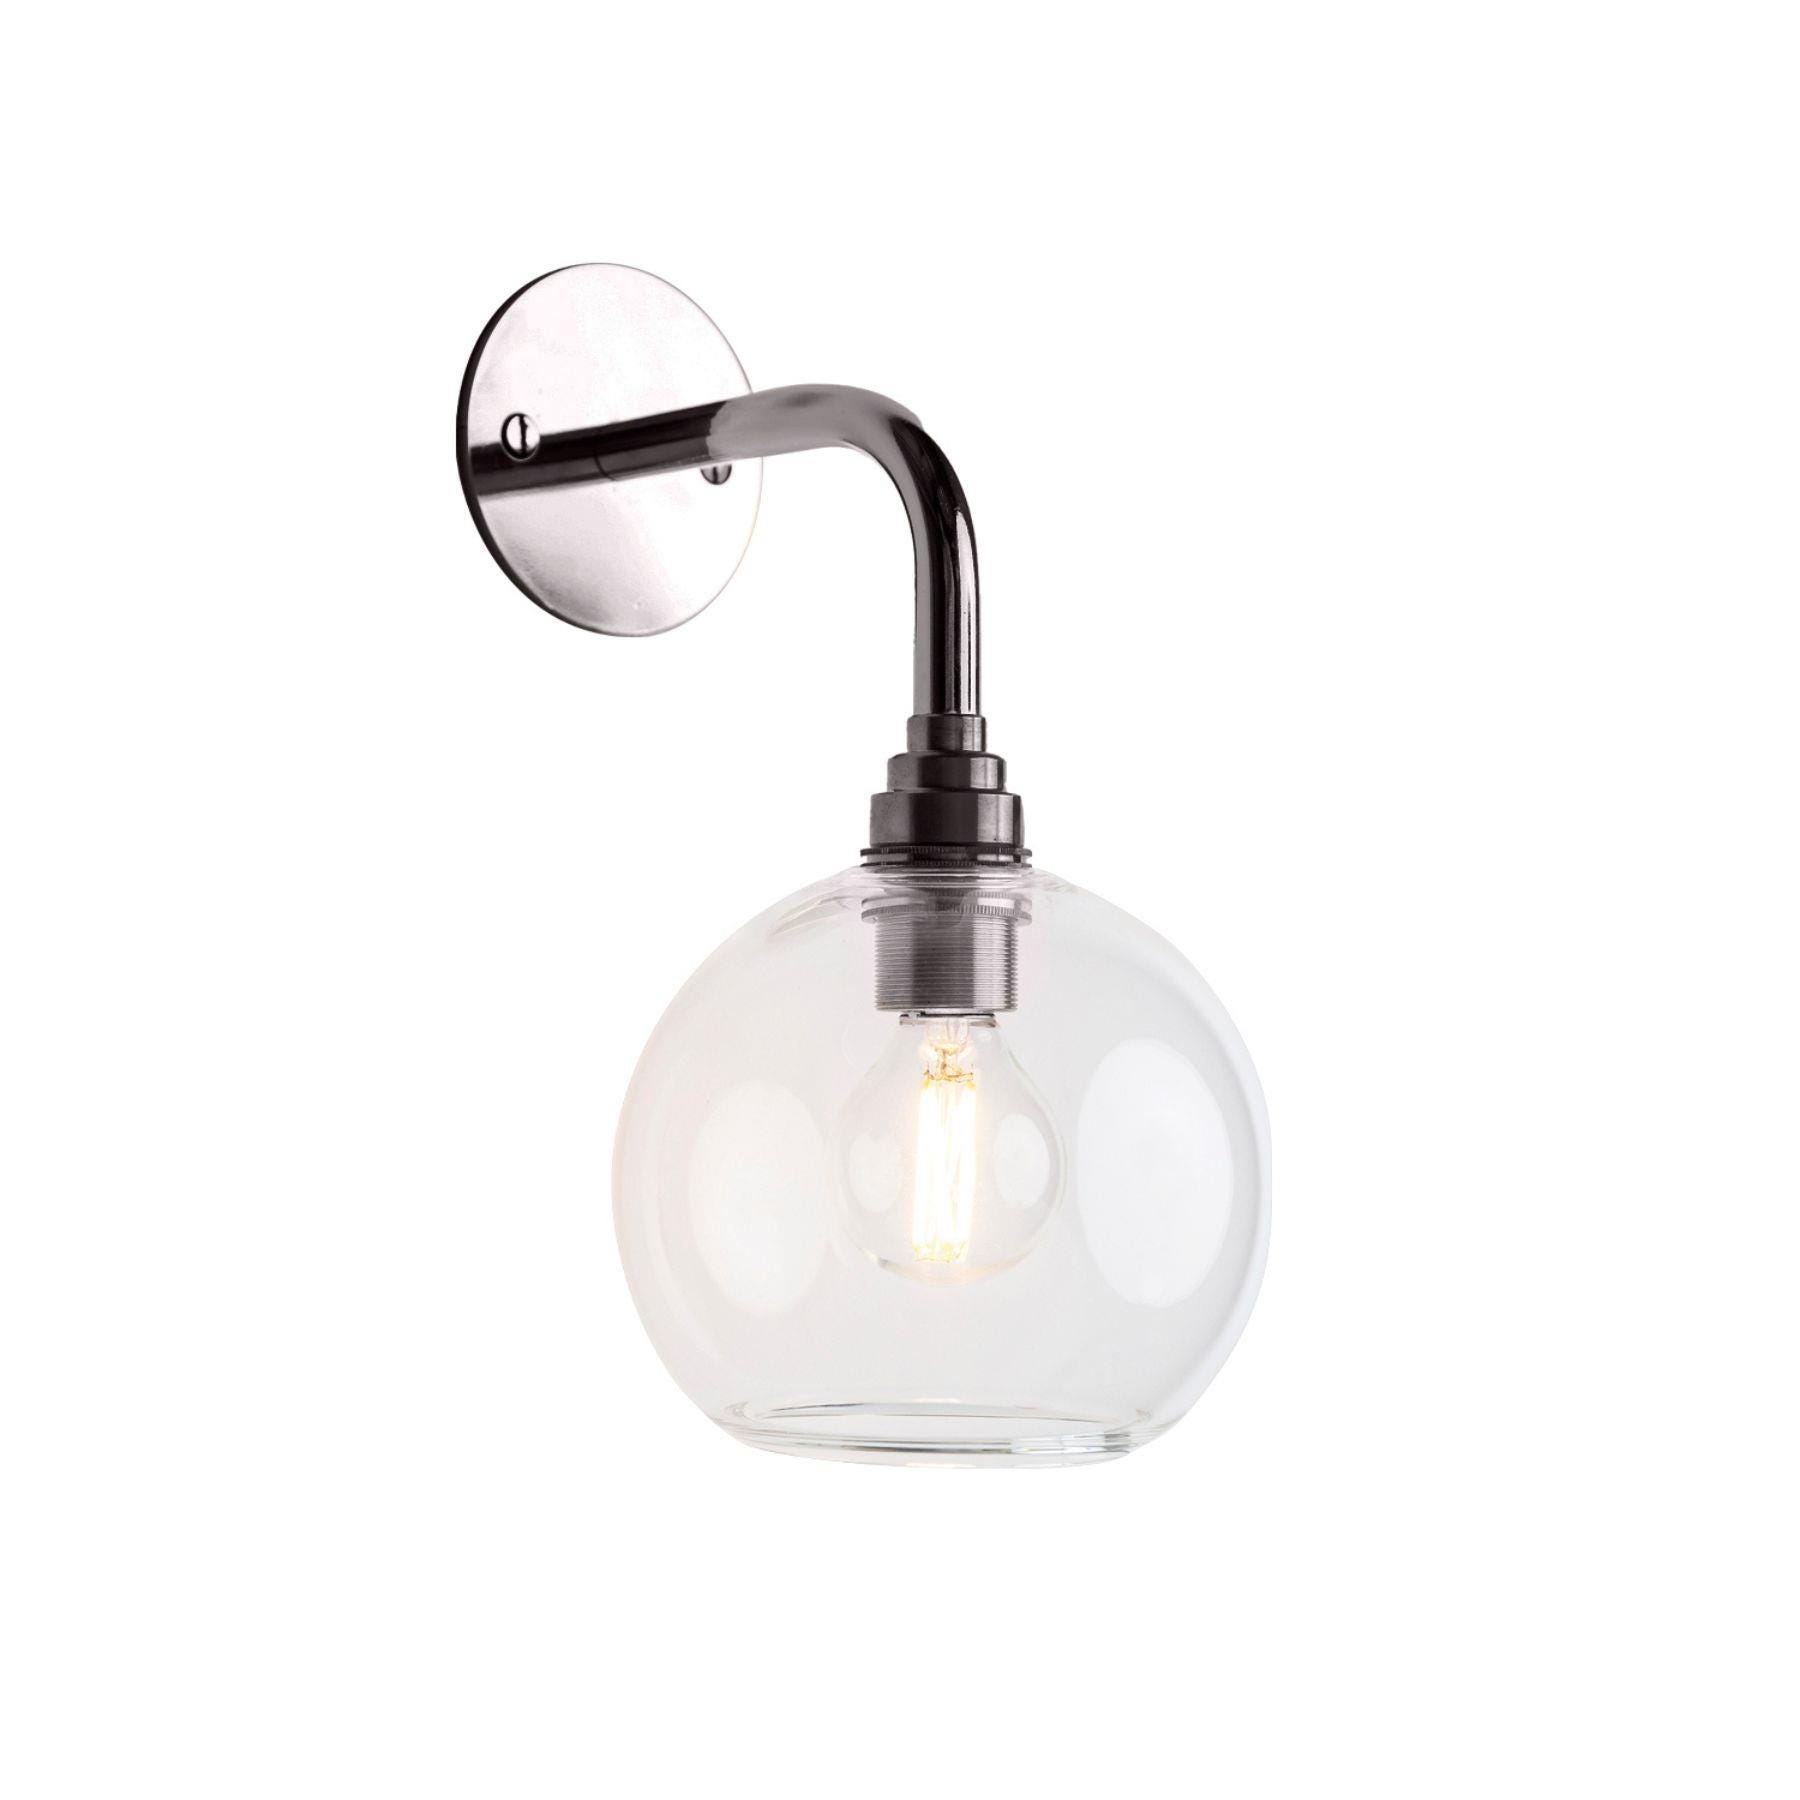 Leverint Pimlico Wall Light Small Opaque White Wall Lighting